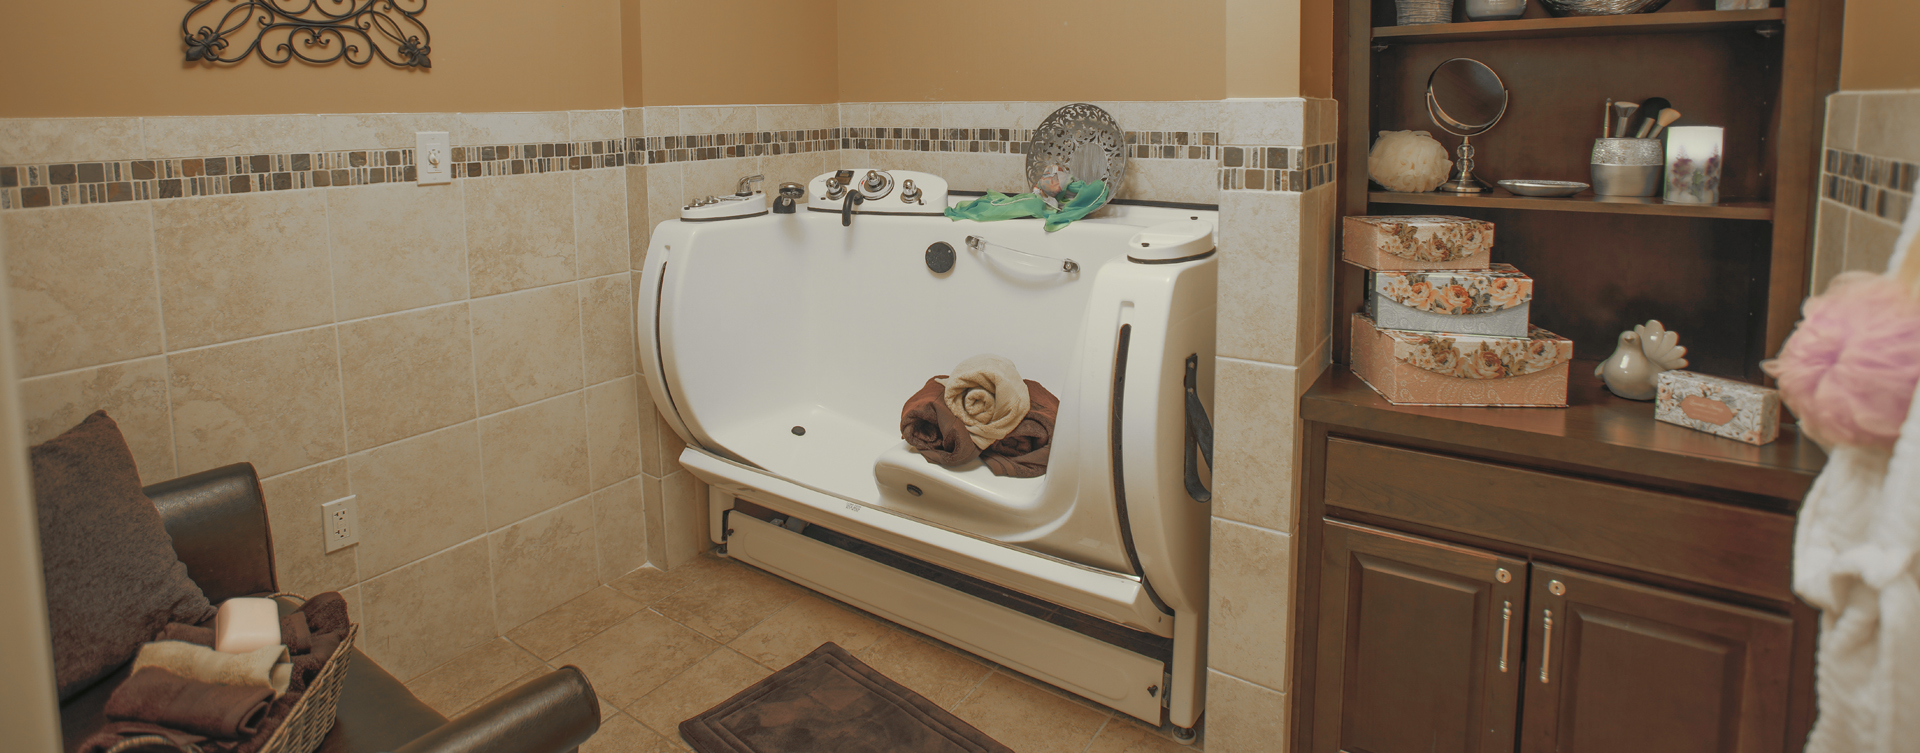 Our whirlpool bathtub creates a spa-like environment tailored to enhance your relaxation and enjoyment at Bickford of Carmel